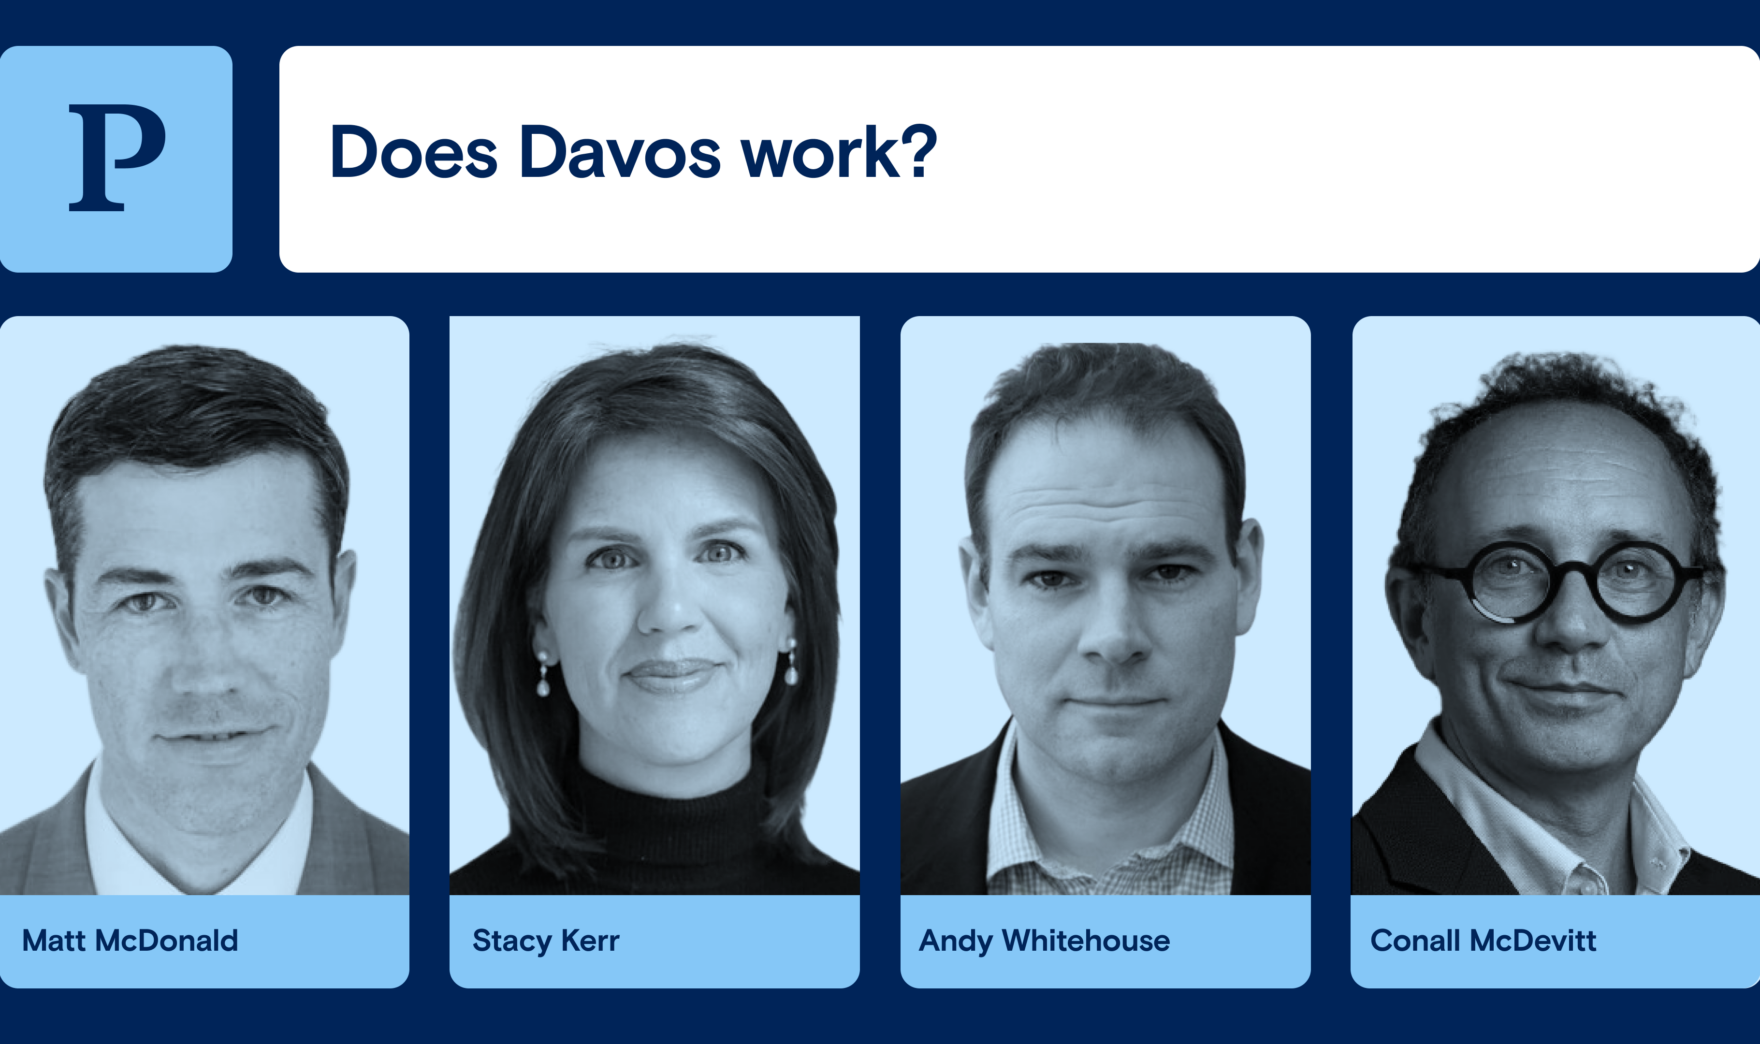 Does Davos work?